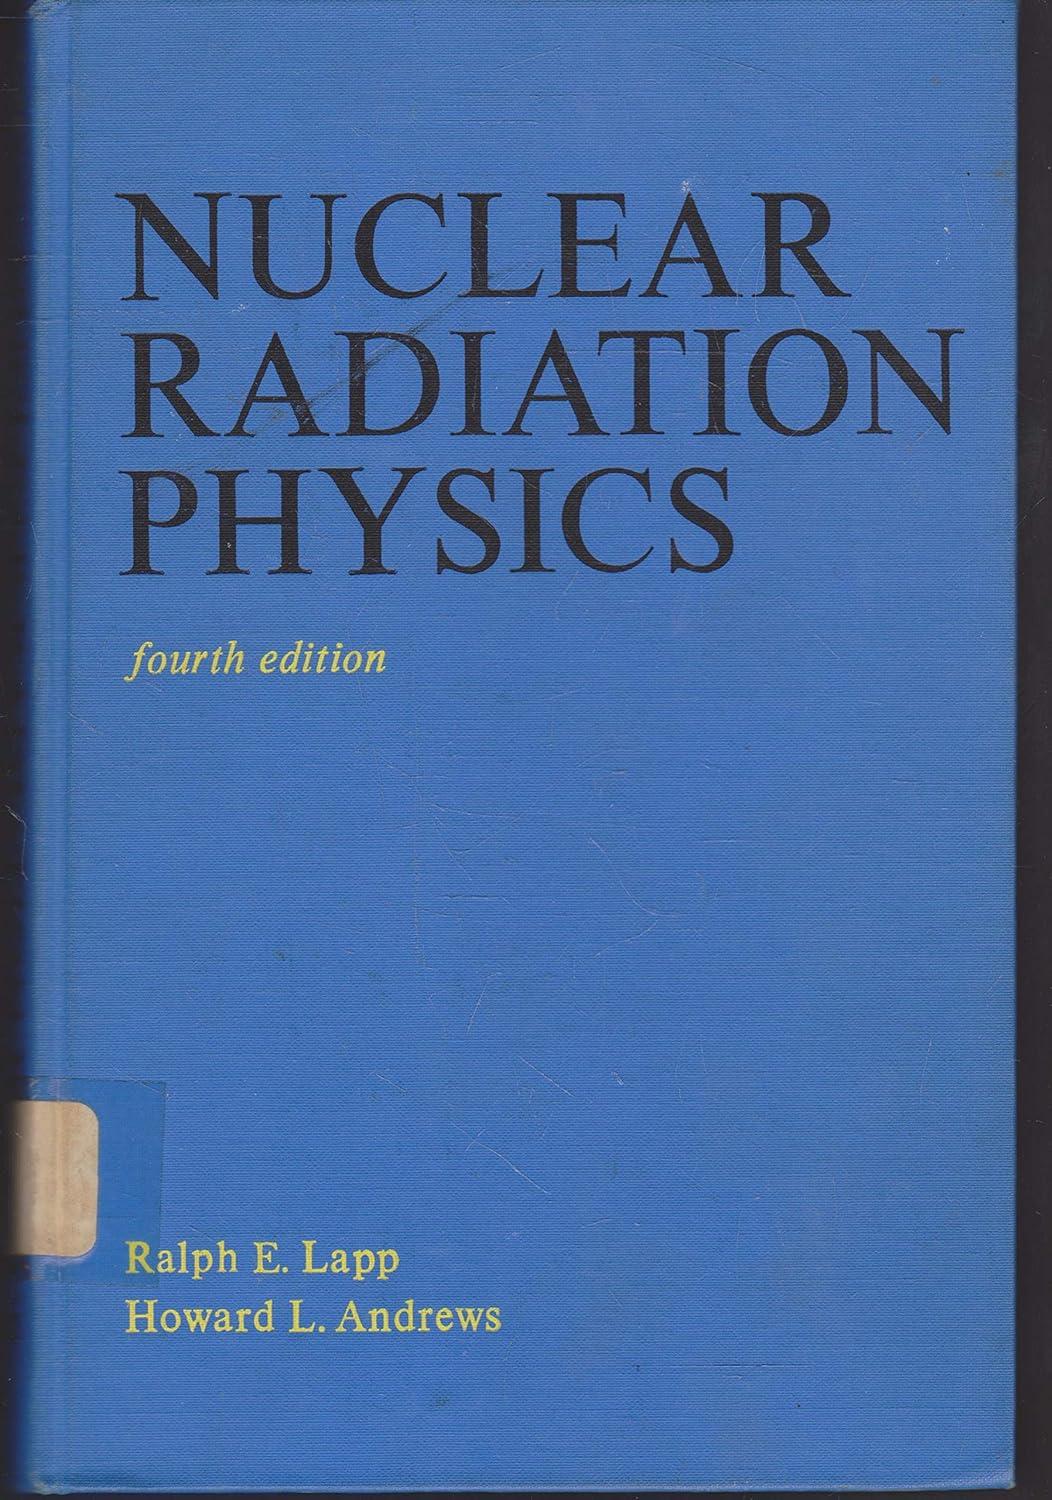 nuclear radiation physics 4th edition ralph eugene lapp, h. l. andrews 013625988x, 978-0136259886